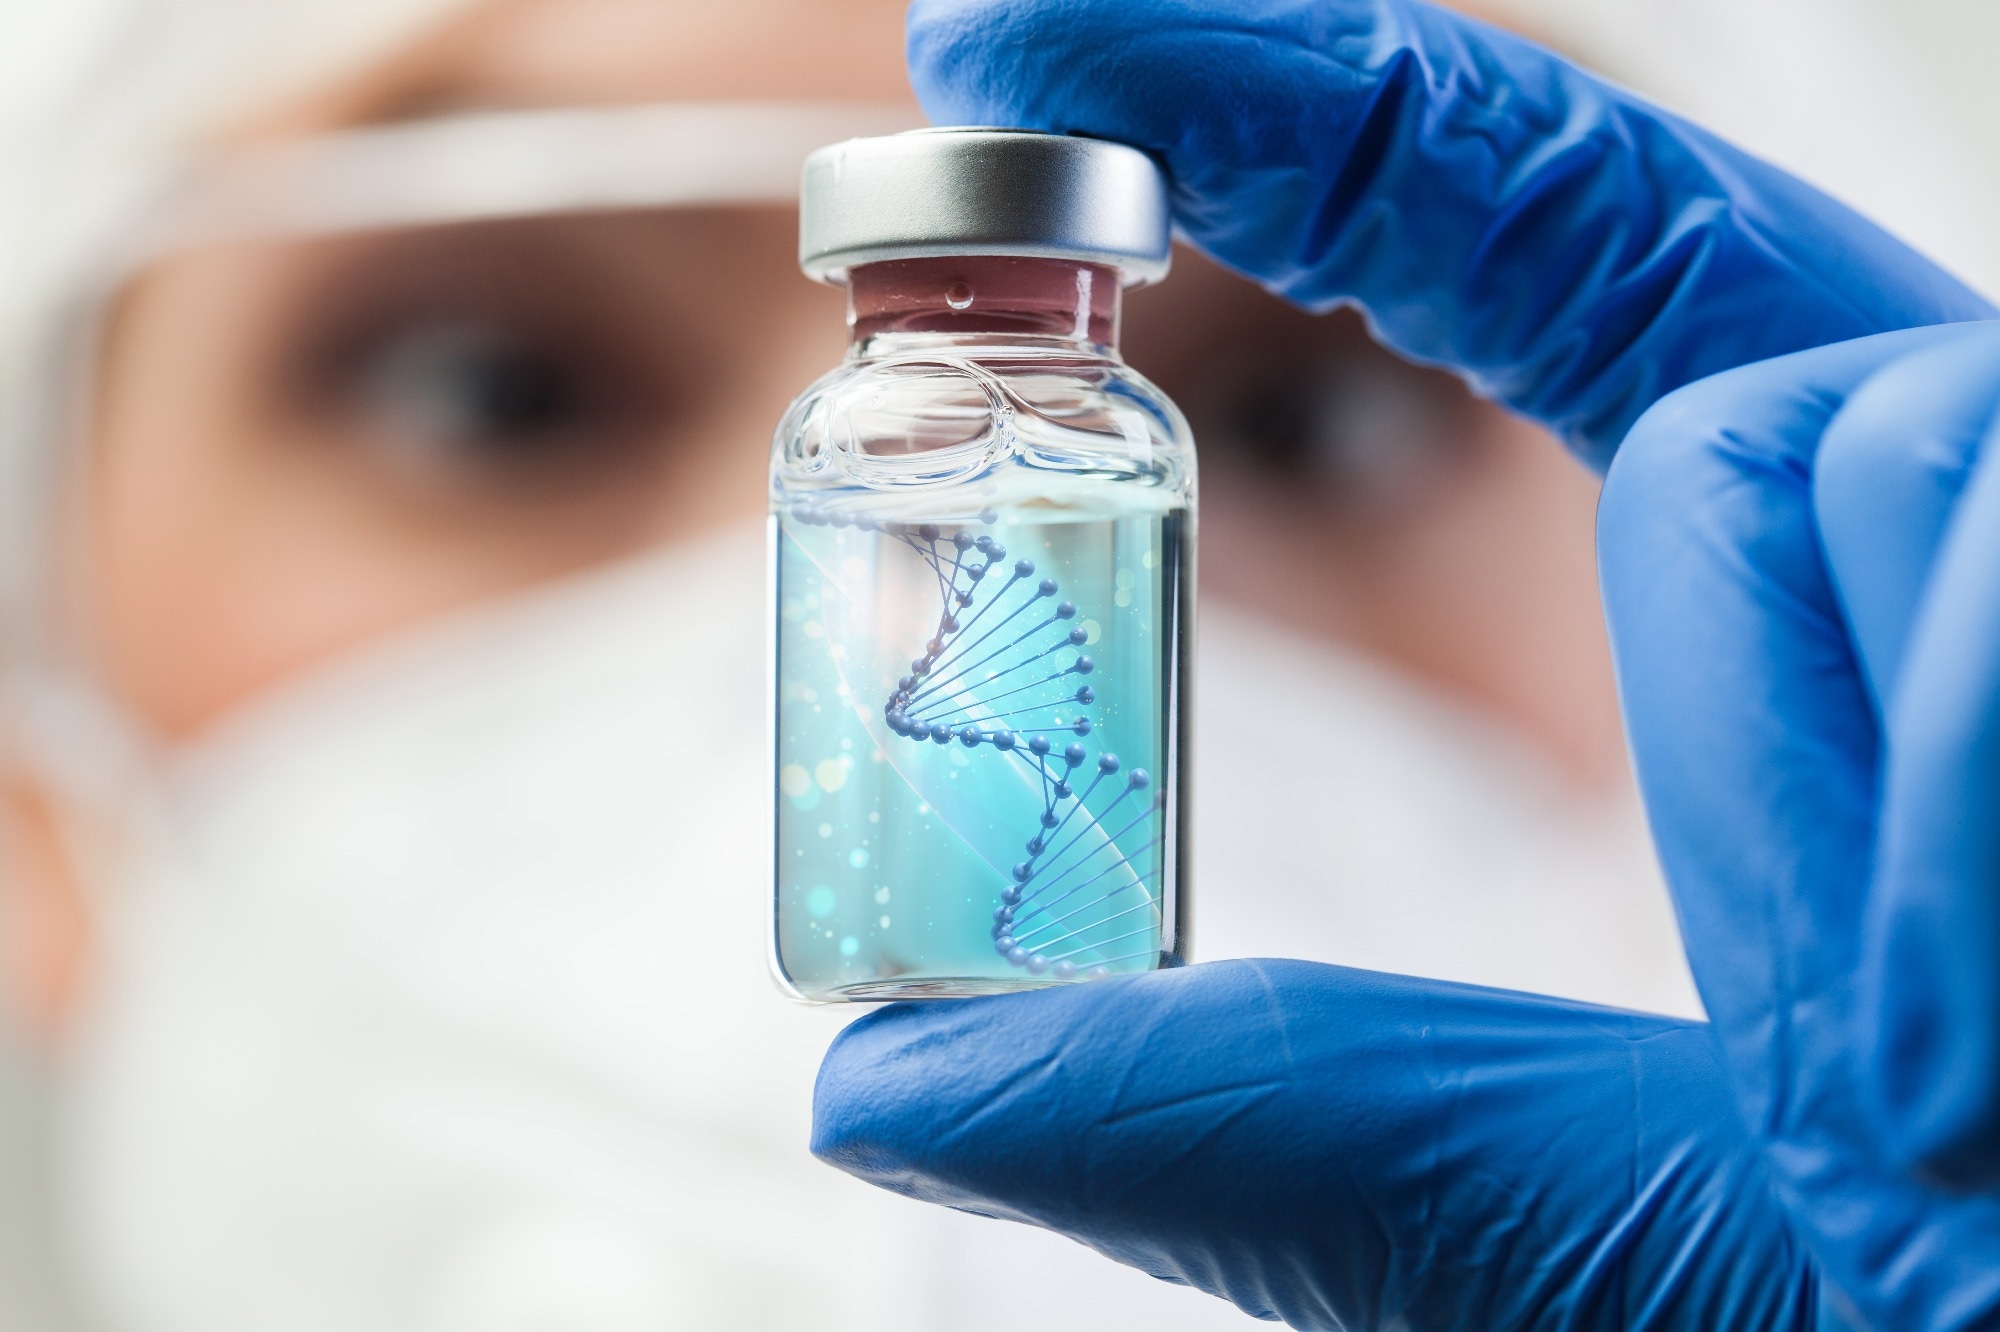 Study: Diagnostic Outcomes of Concurrent DNA and RNA Sequencing in Individuals Undergoing Hereditary Cancer Testing. Image Credit: Cryptographer/Shutterstock.com